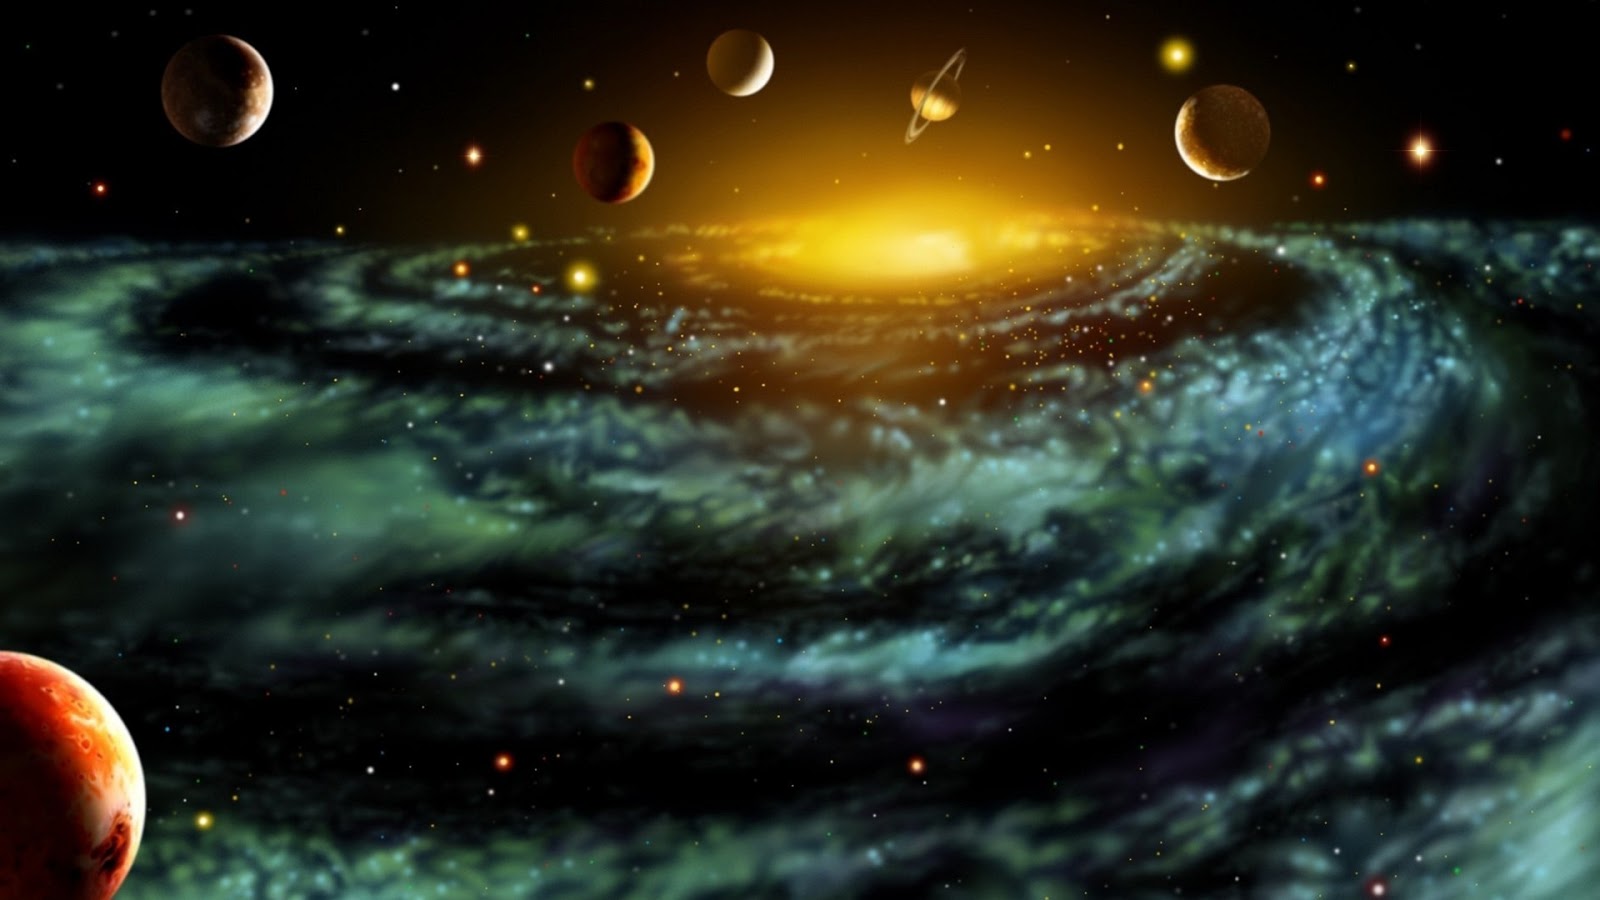 In Space Collection HD Wallpaper For Desktop Beautiful